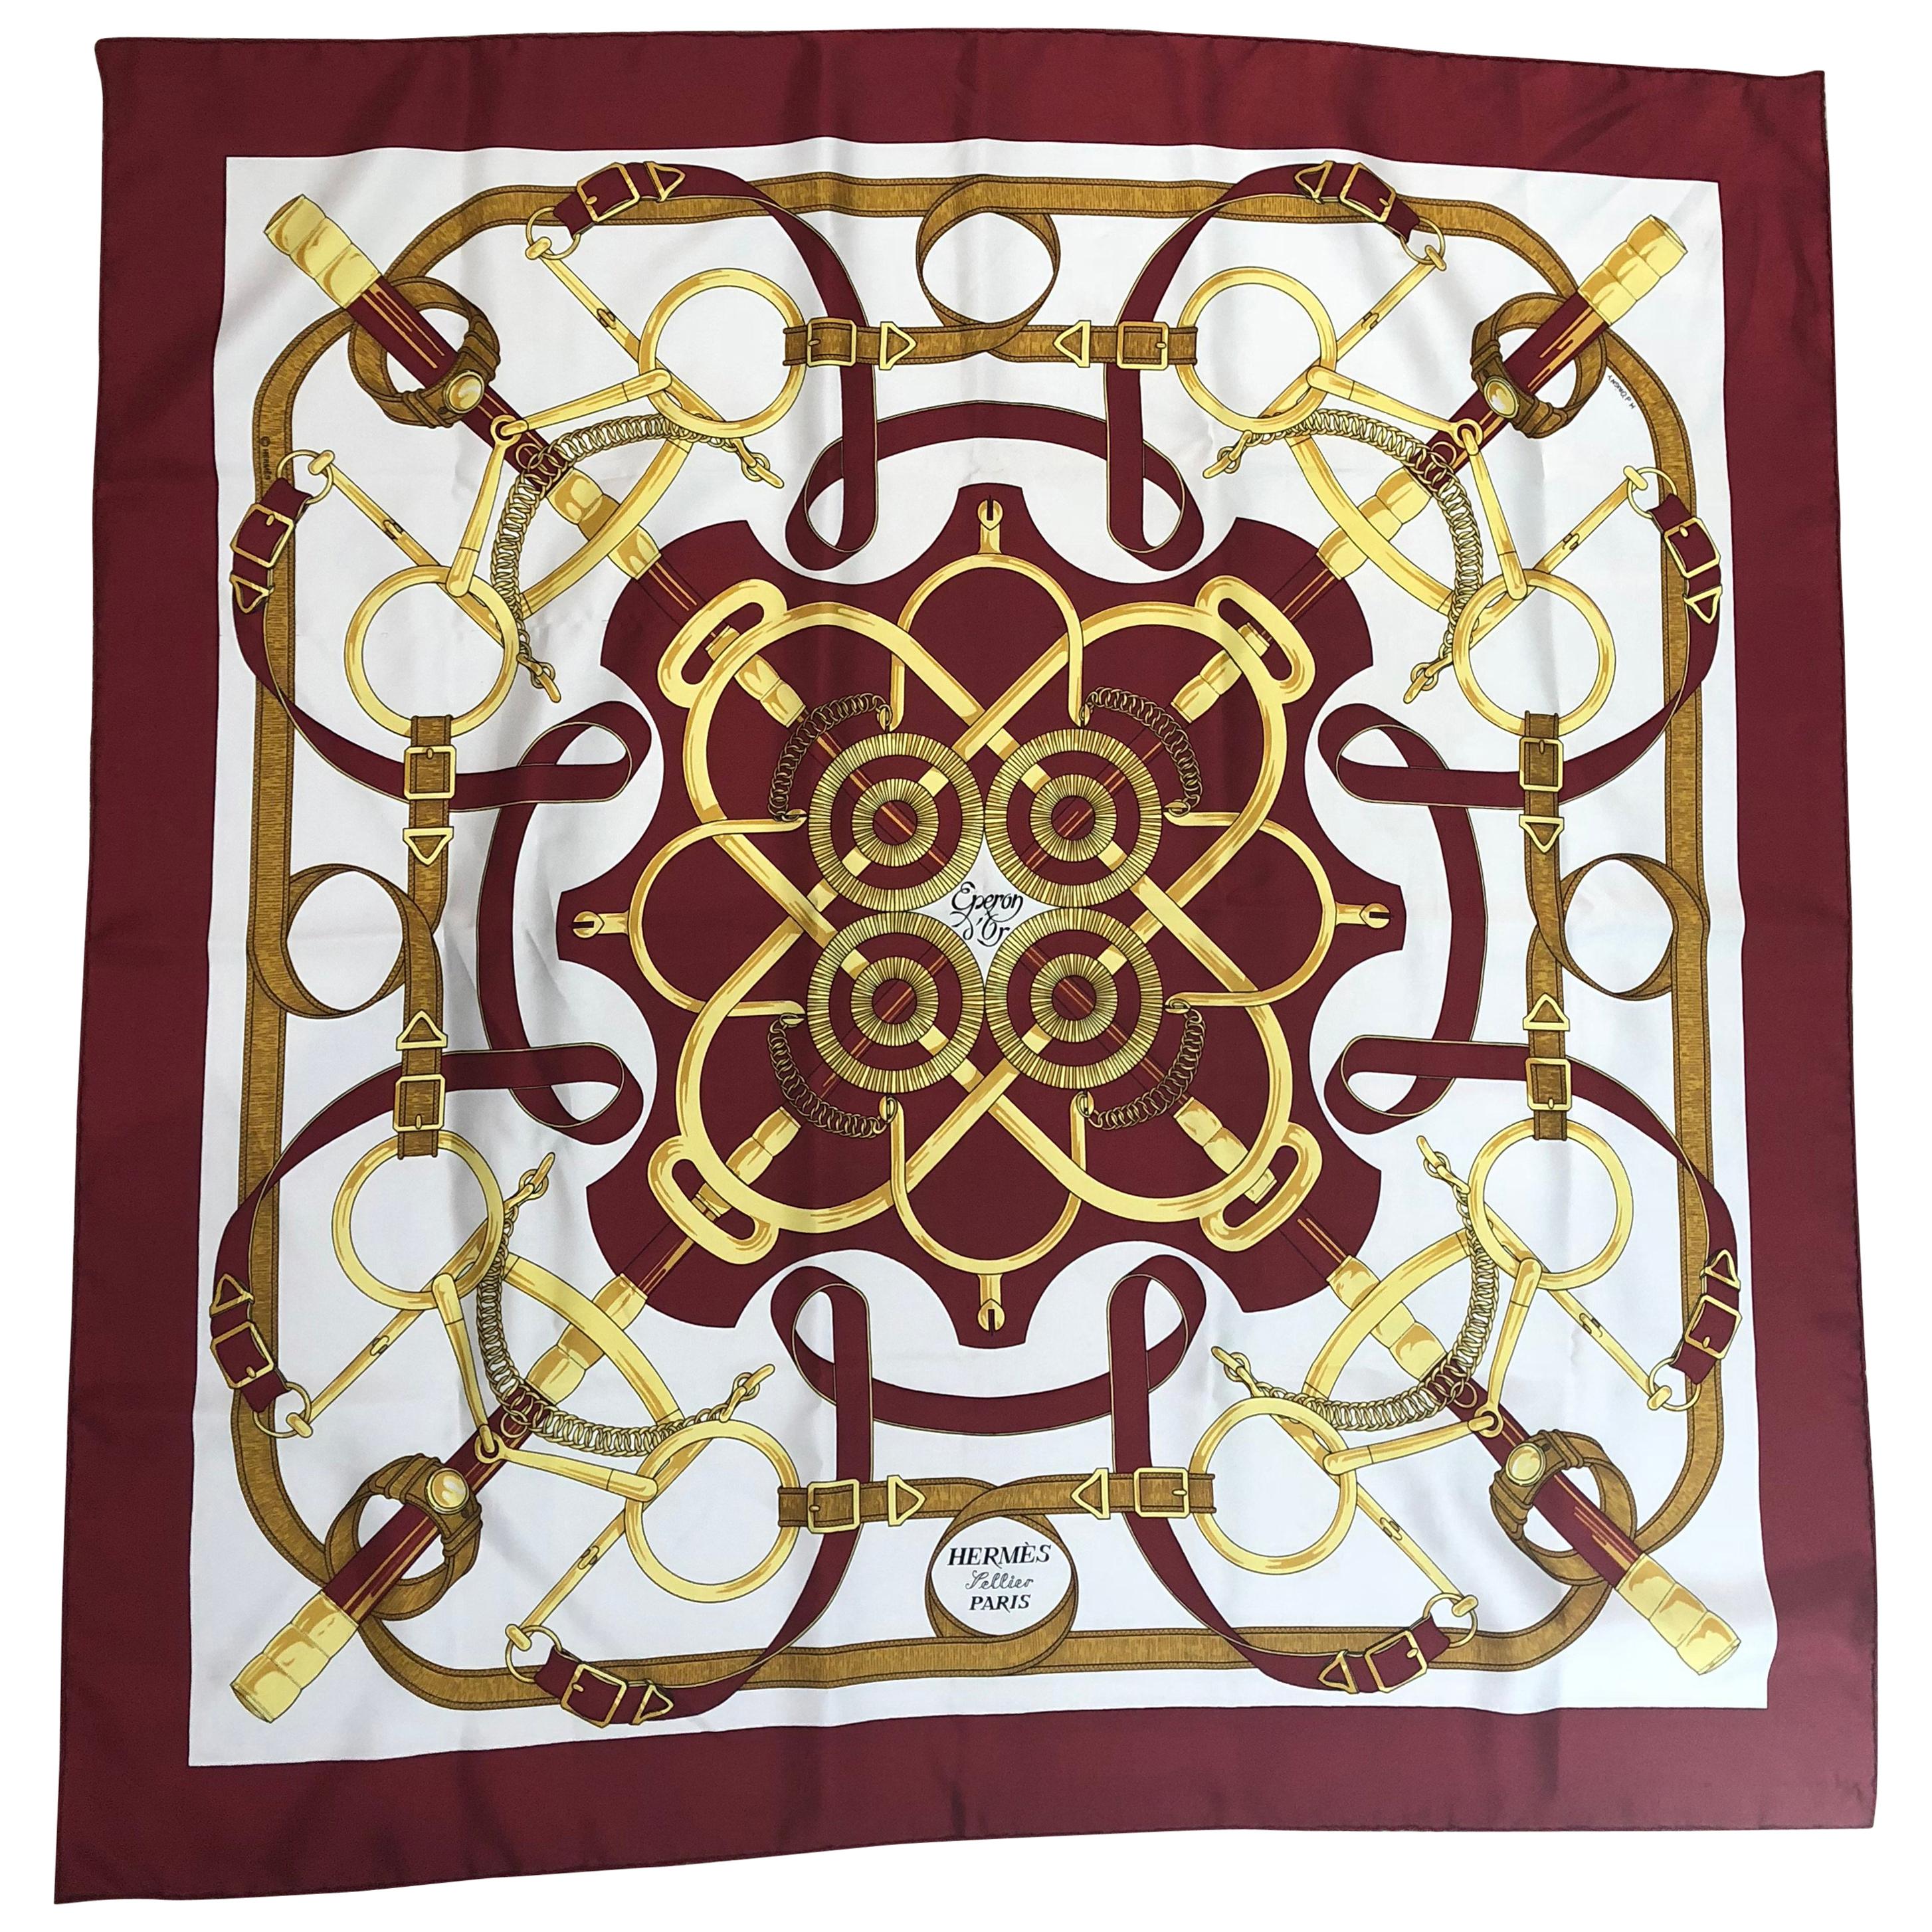 Hermes Eperon D'or Scarf 